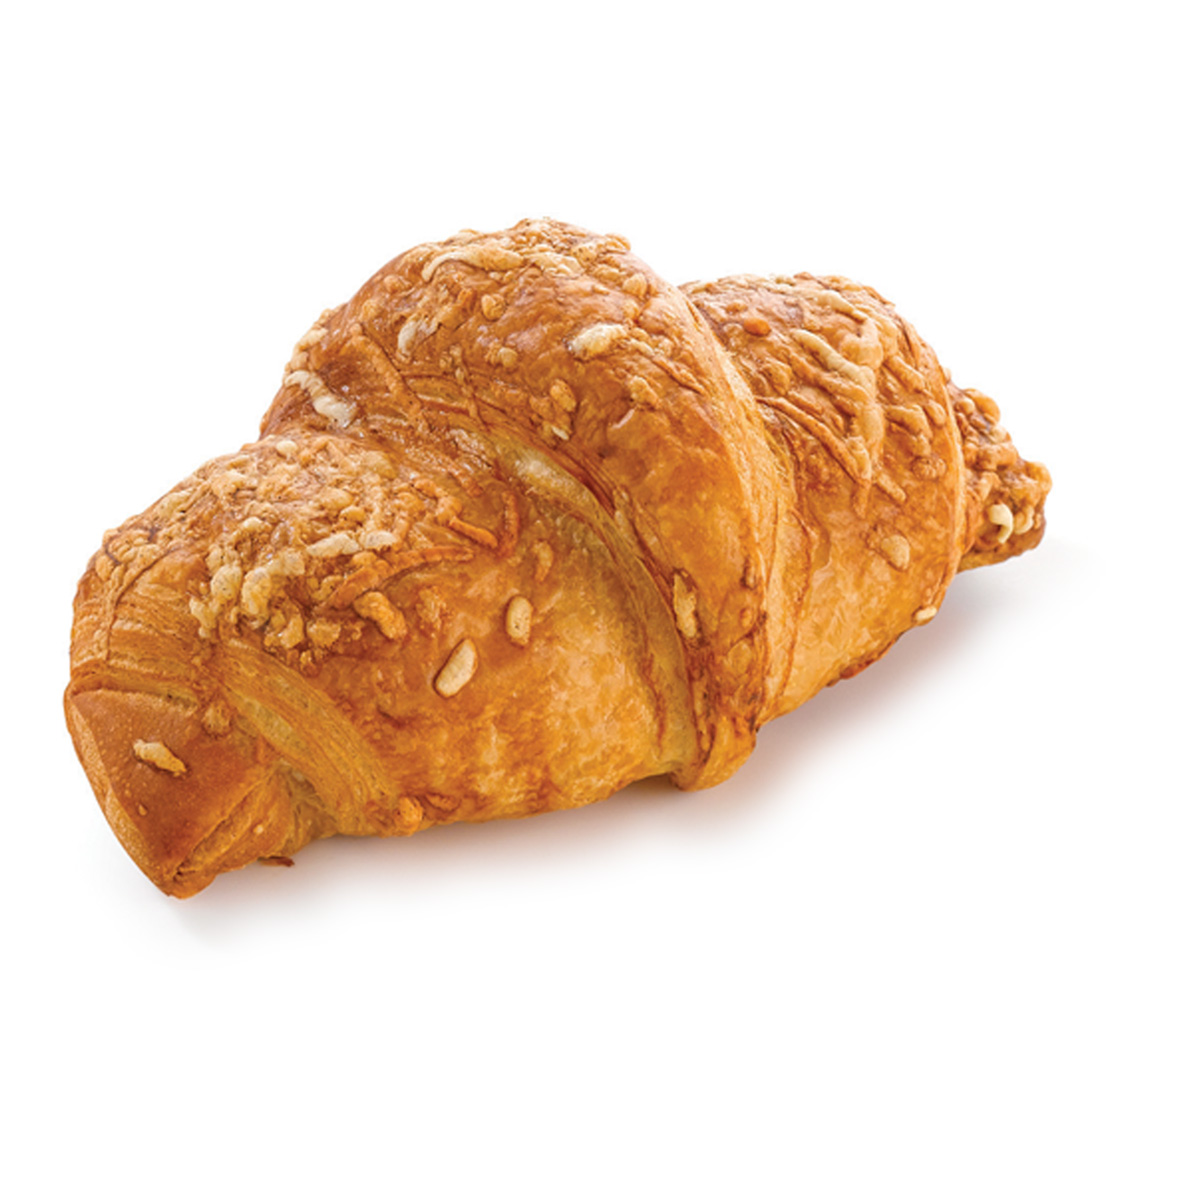 Molco Croissant jambon-fromage